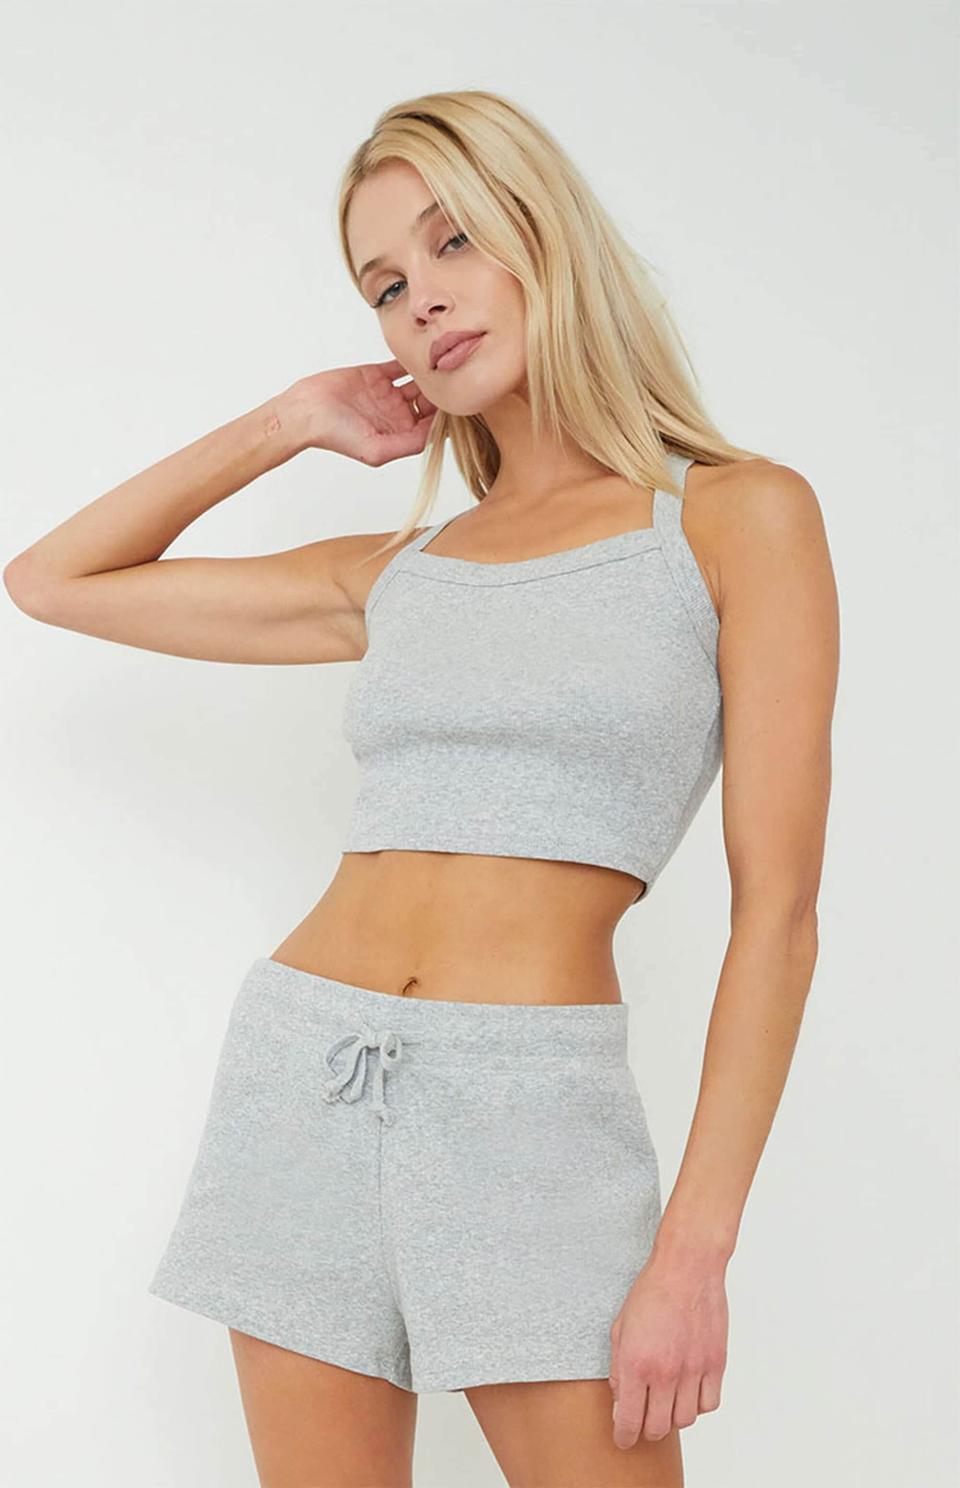 <p>Aritzia is known for quality basics, and if you're looking for more matching lounge sets, check out PacSun. Yes, the brand is filled with cute bikinis and California-cool dresses, but there's also a plethora of cozy loungewear to choose from. We love these <span>LA Hearts by PacSun Lounge Stella Ribbed Shorts</span> ($27) and <span>LA Hearts by PacSun Lounge Stella Ribbed Tank Top</span> ($21, originally $23) to sleep or lounge in on a hot summer day.</p>